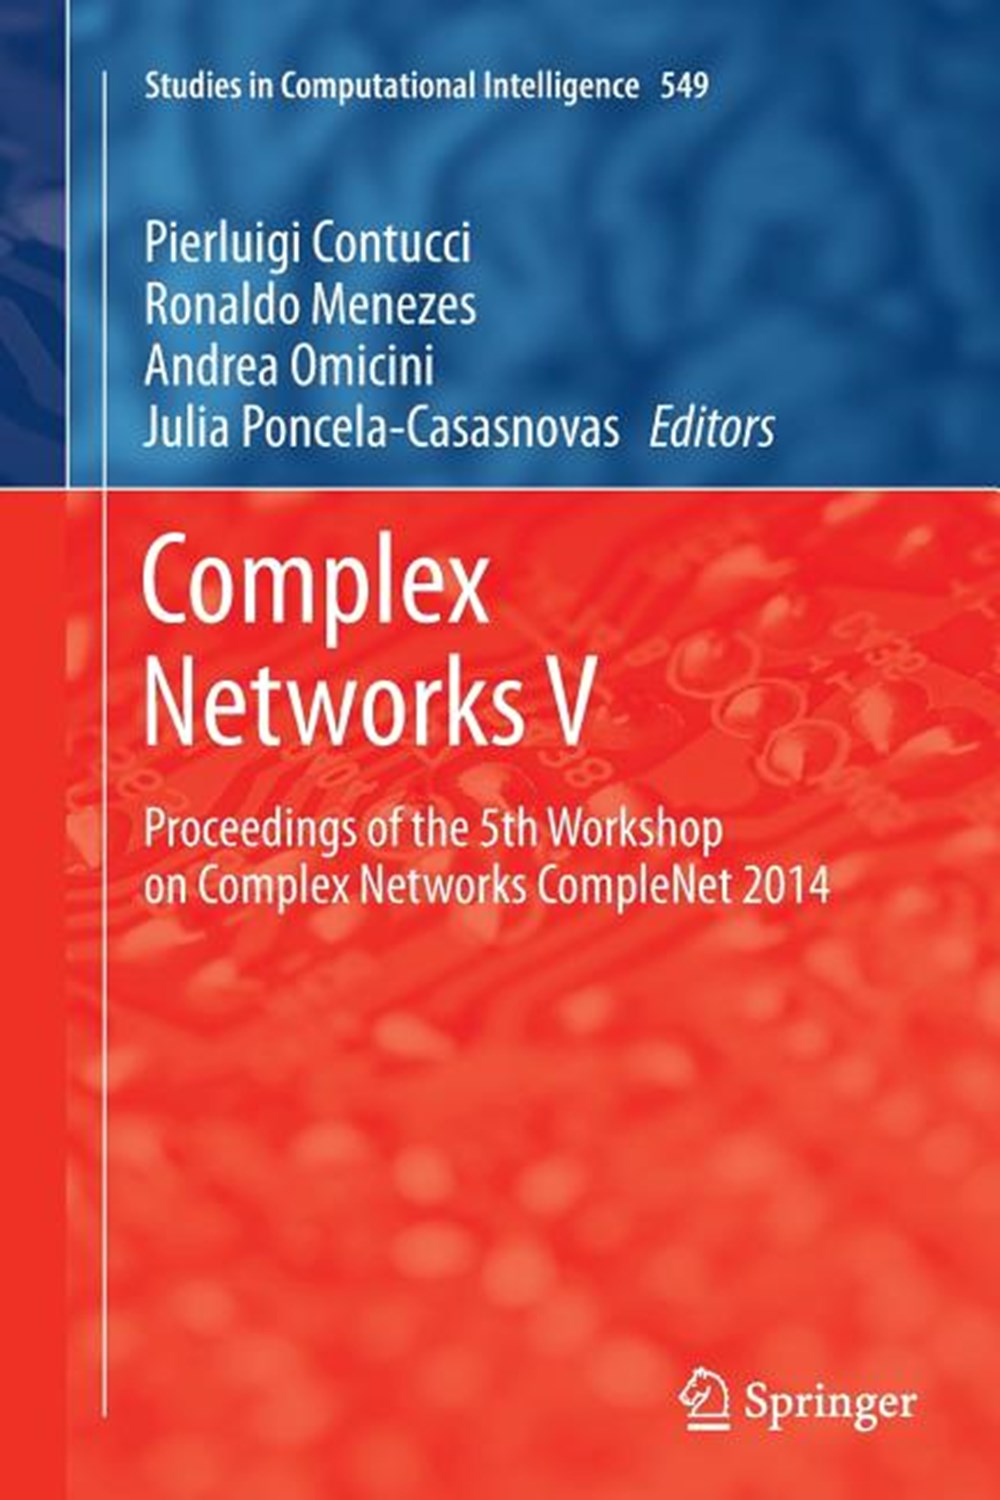 Complex Networks V: Proceedings of the 5th Workshop on Complex Networks Complenet 2014 (Softcover Re